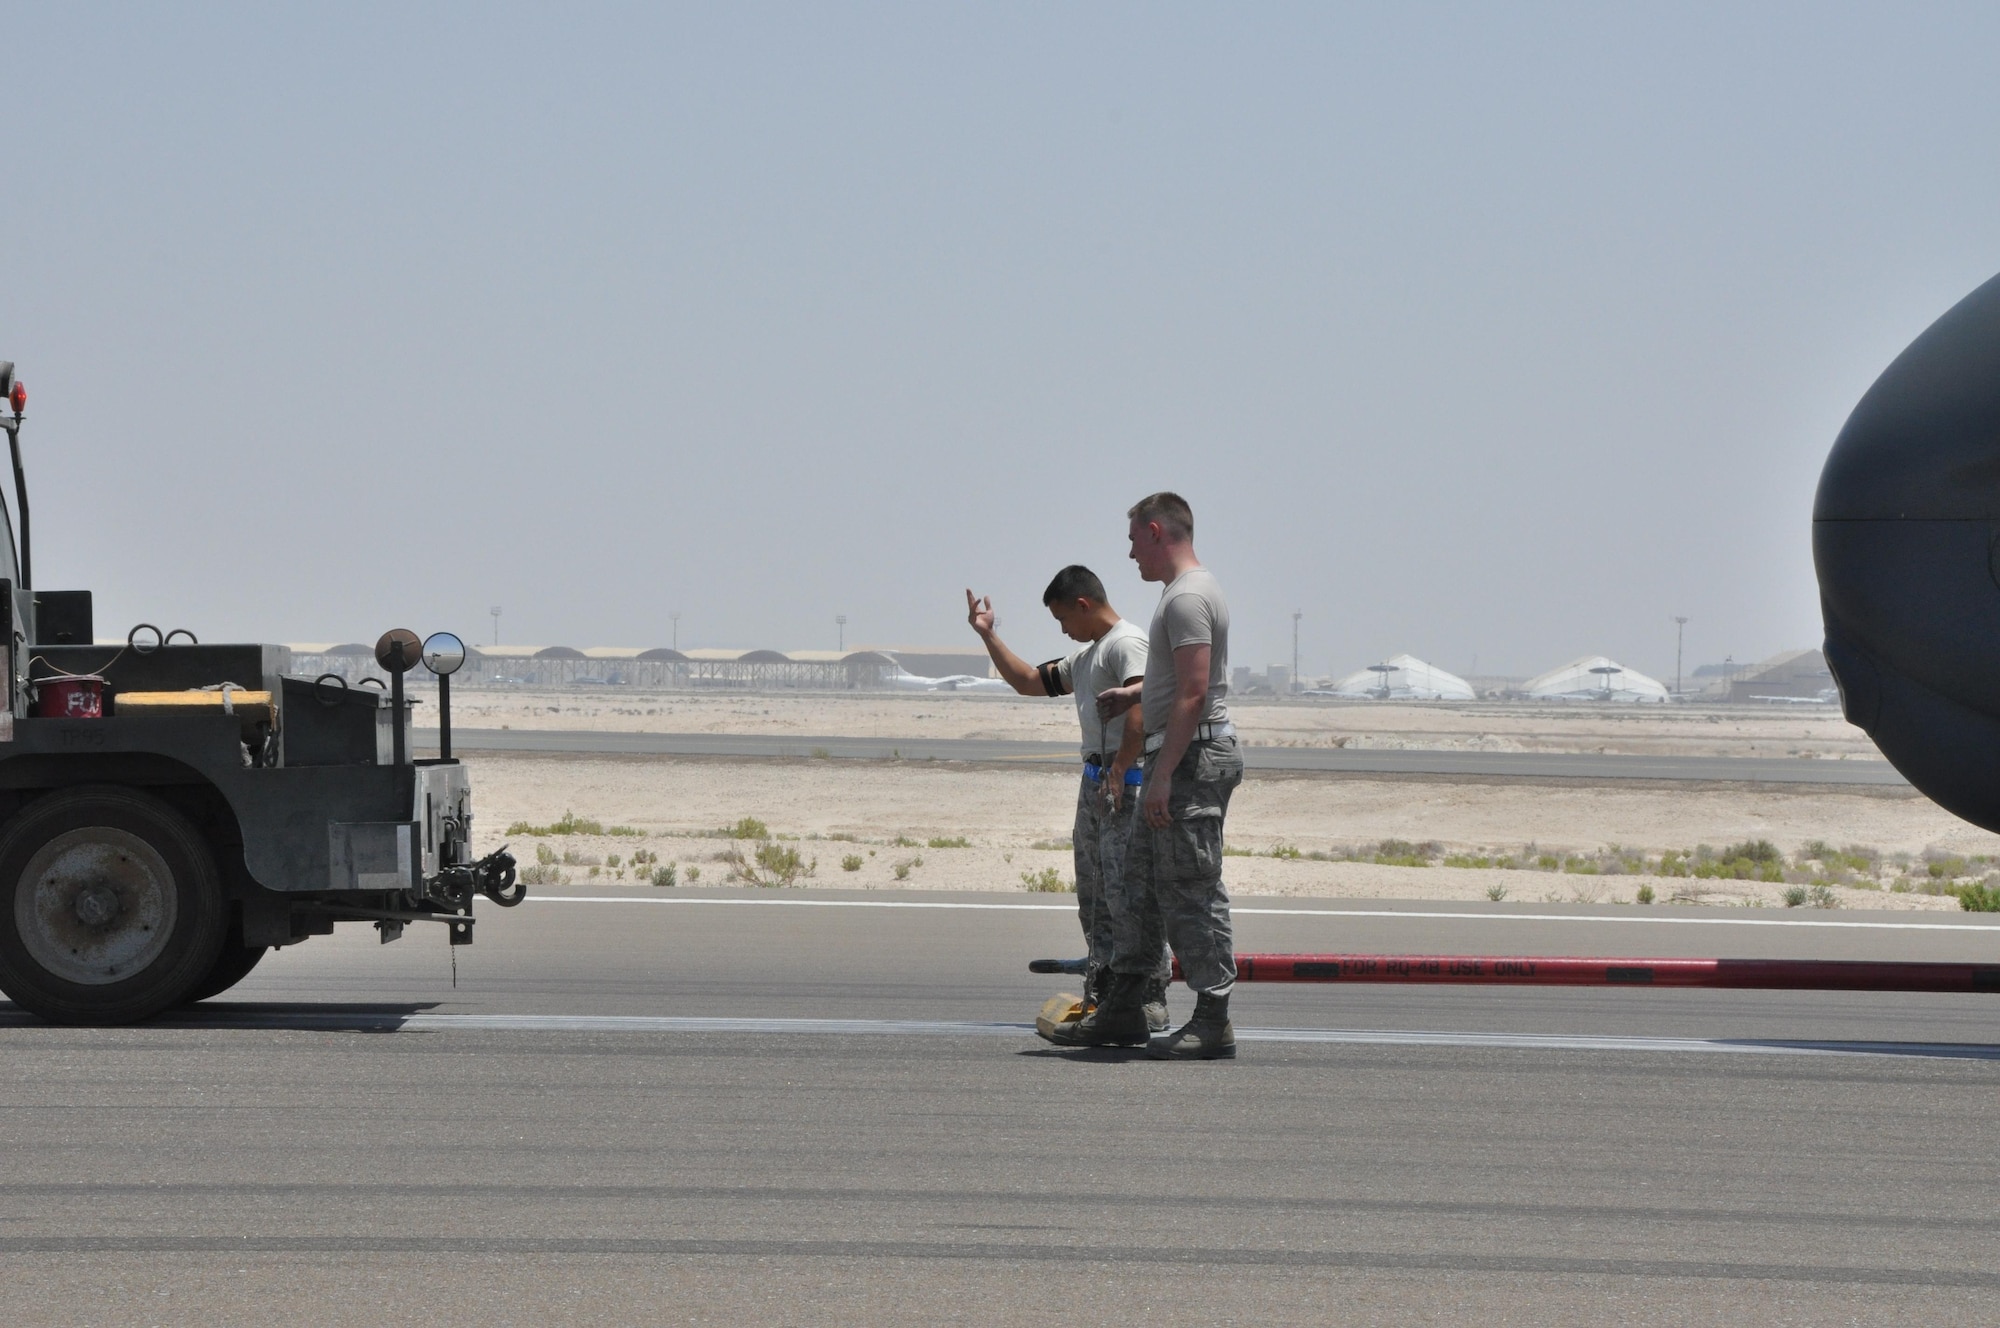 Staff Sgt. Phillip (left) and Senior Airman Alan (right), 380th Expeditionary Aircraft Maintenance Squadron Global Hawk technicians, spot a reversing vehicle to connect a tow bar to a RQ-4 Global Hawk, May 16. The Global Hawk is capable of providing near real-time information to assist in saving lives during worldwide peacetime, contingency and wartime operations. (U.S. Air Force photo by Staff Sgt. Samantha Mathison)